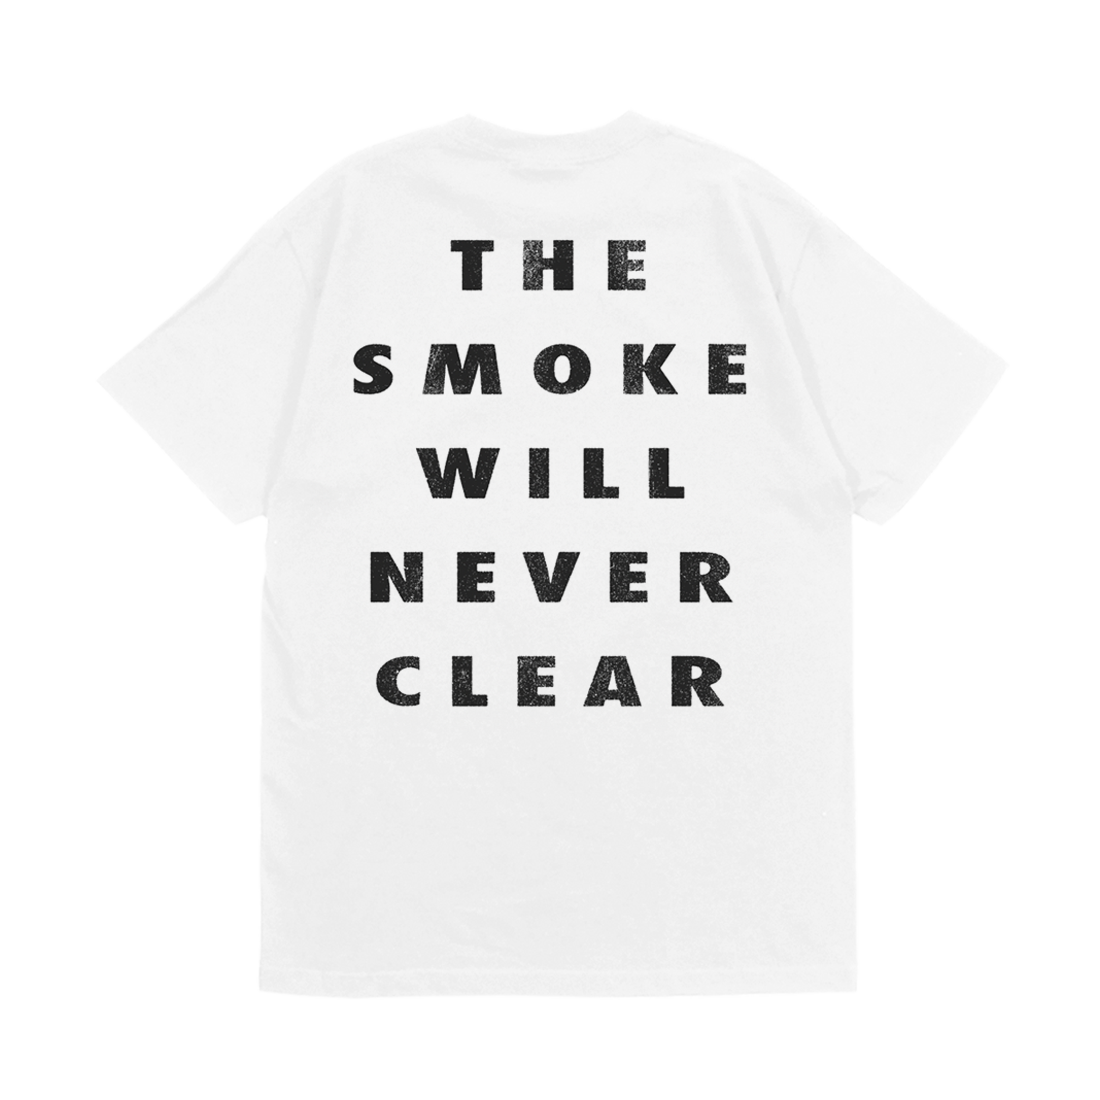 THE SMOKE WILL NEVER CLEAR T-SHIRT back